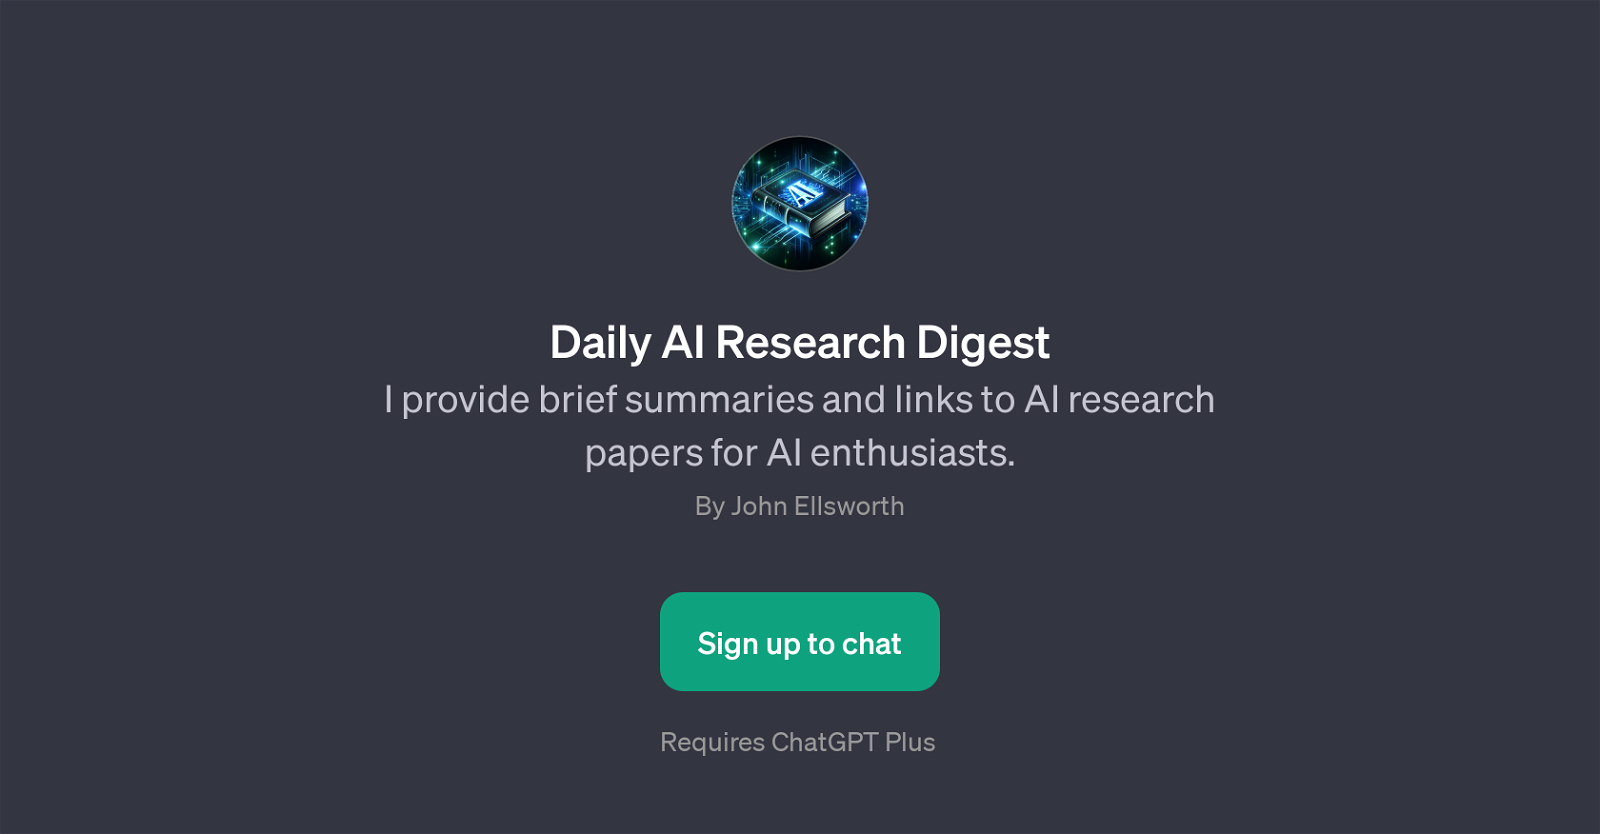 Daily AI Research Digest website